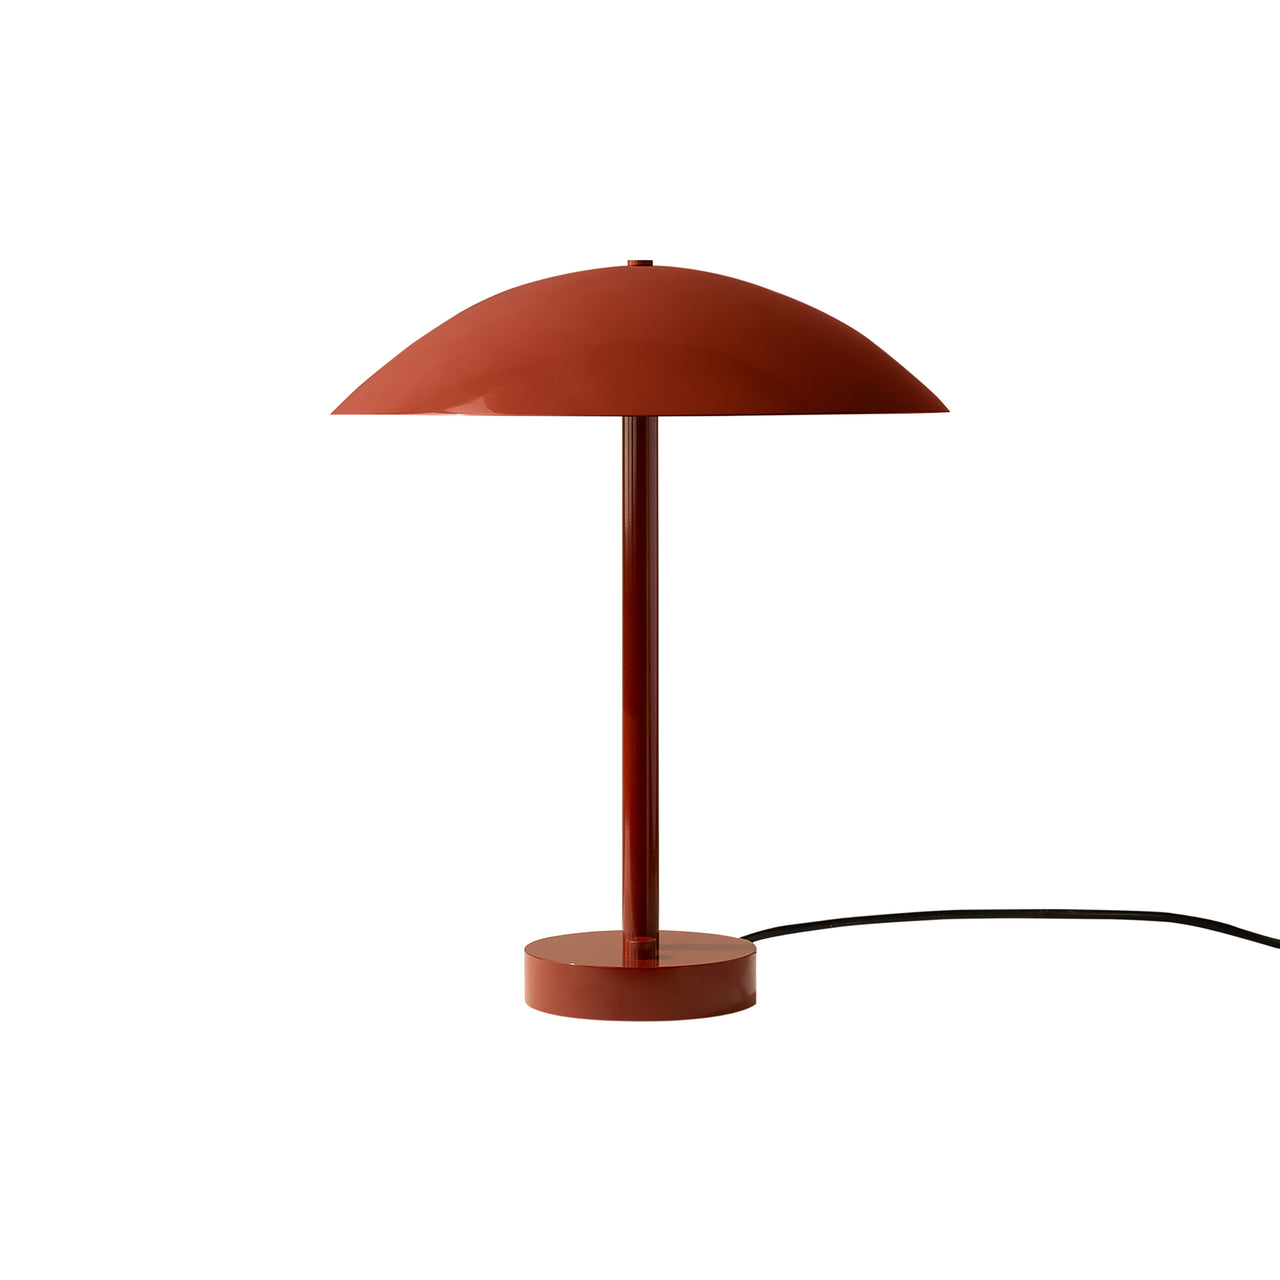 Arundel Table Lamp: Oxide Red + Oxide Red